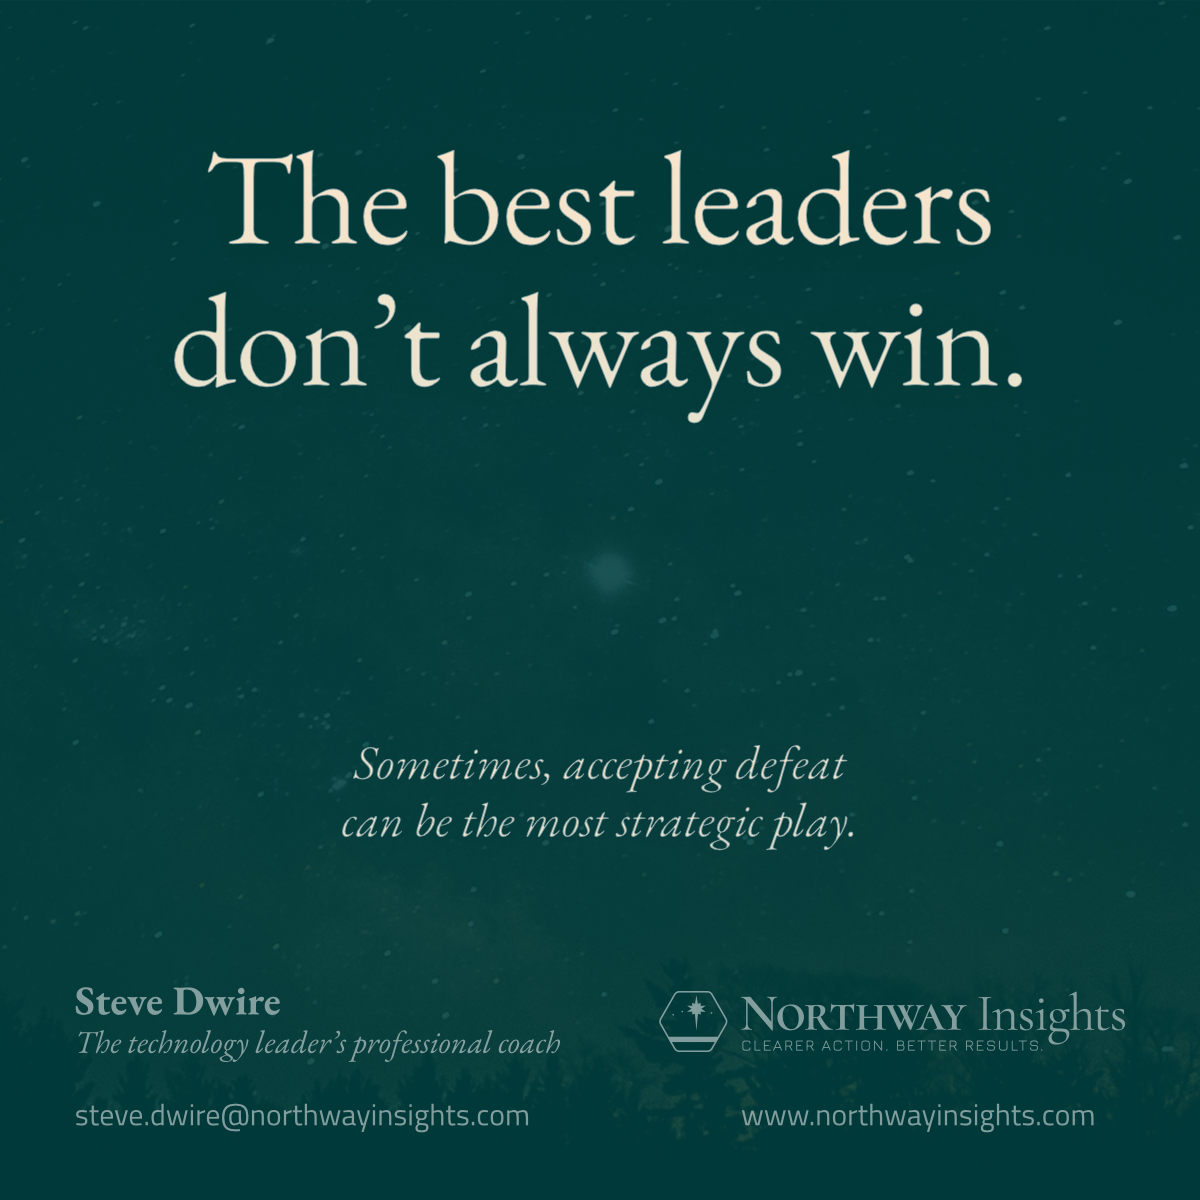 The best leaders don’t always win